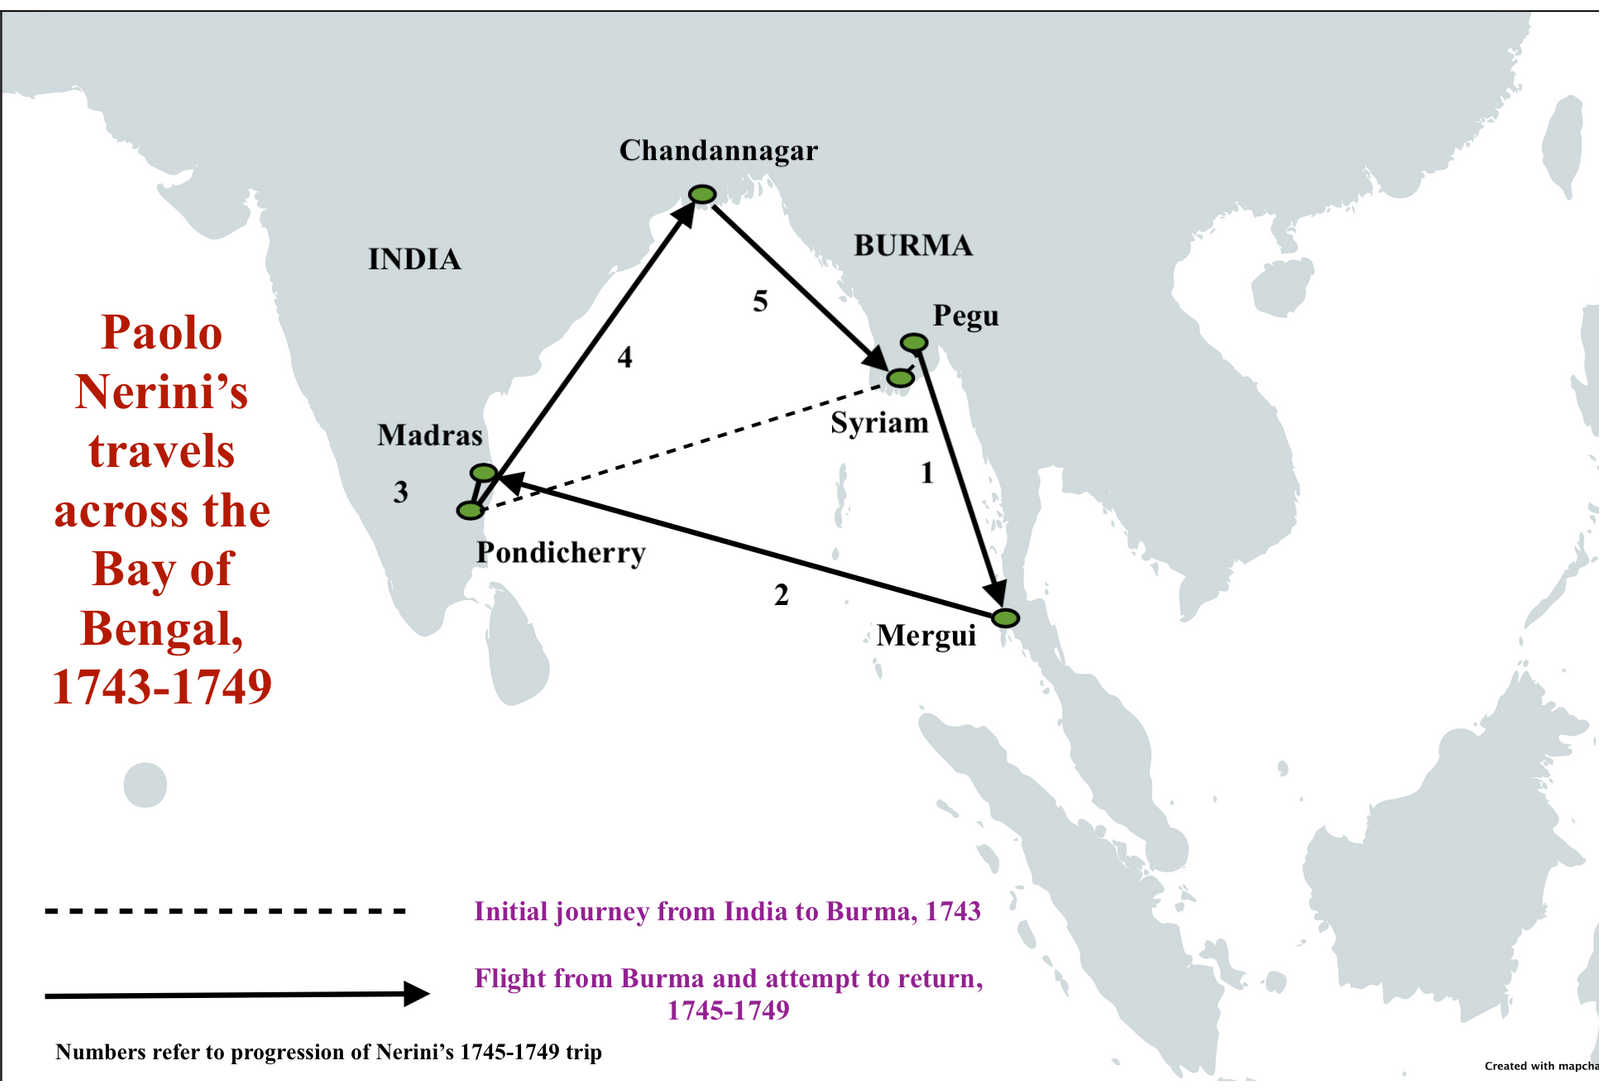 Hitching a Ride: The transport woes of a Barnabite in the Bay of Bengal, 1745-1749